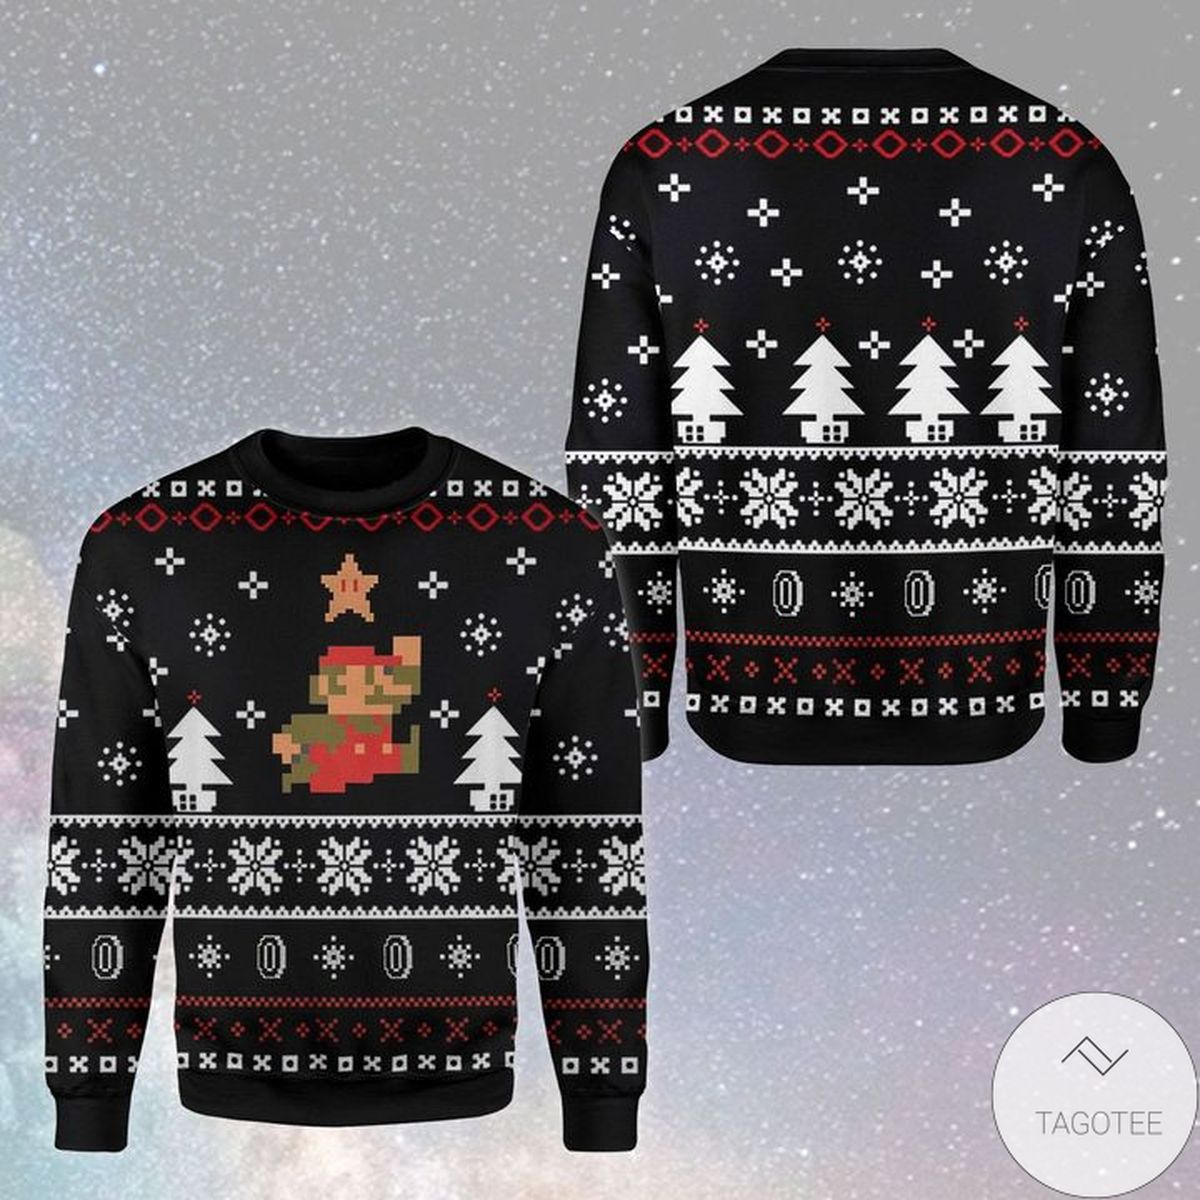 Super Mario Game Black Ugly Christmas Sweater